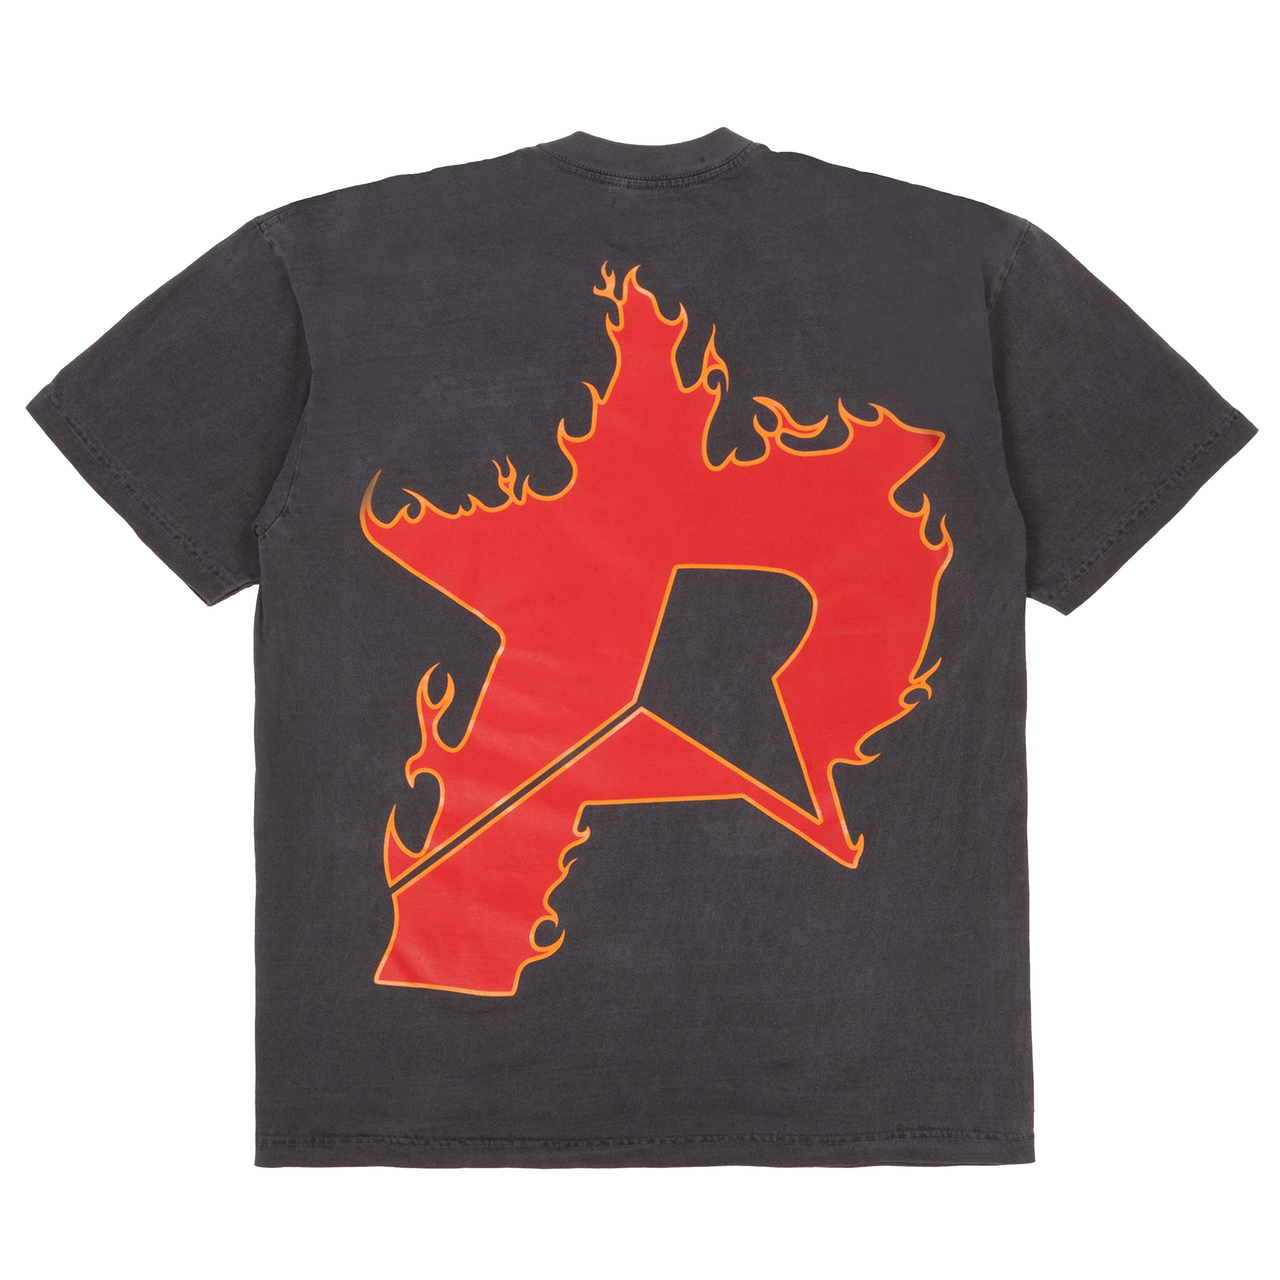 Pieces P Star Flames Tee Black Red